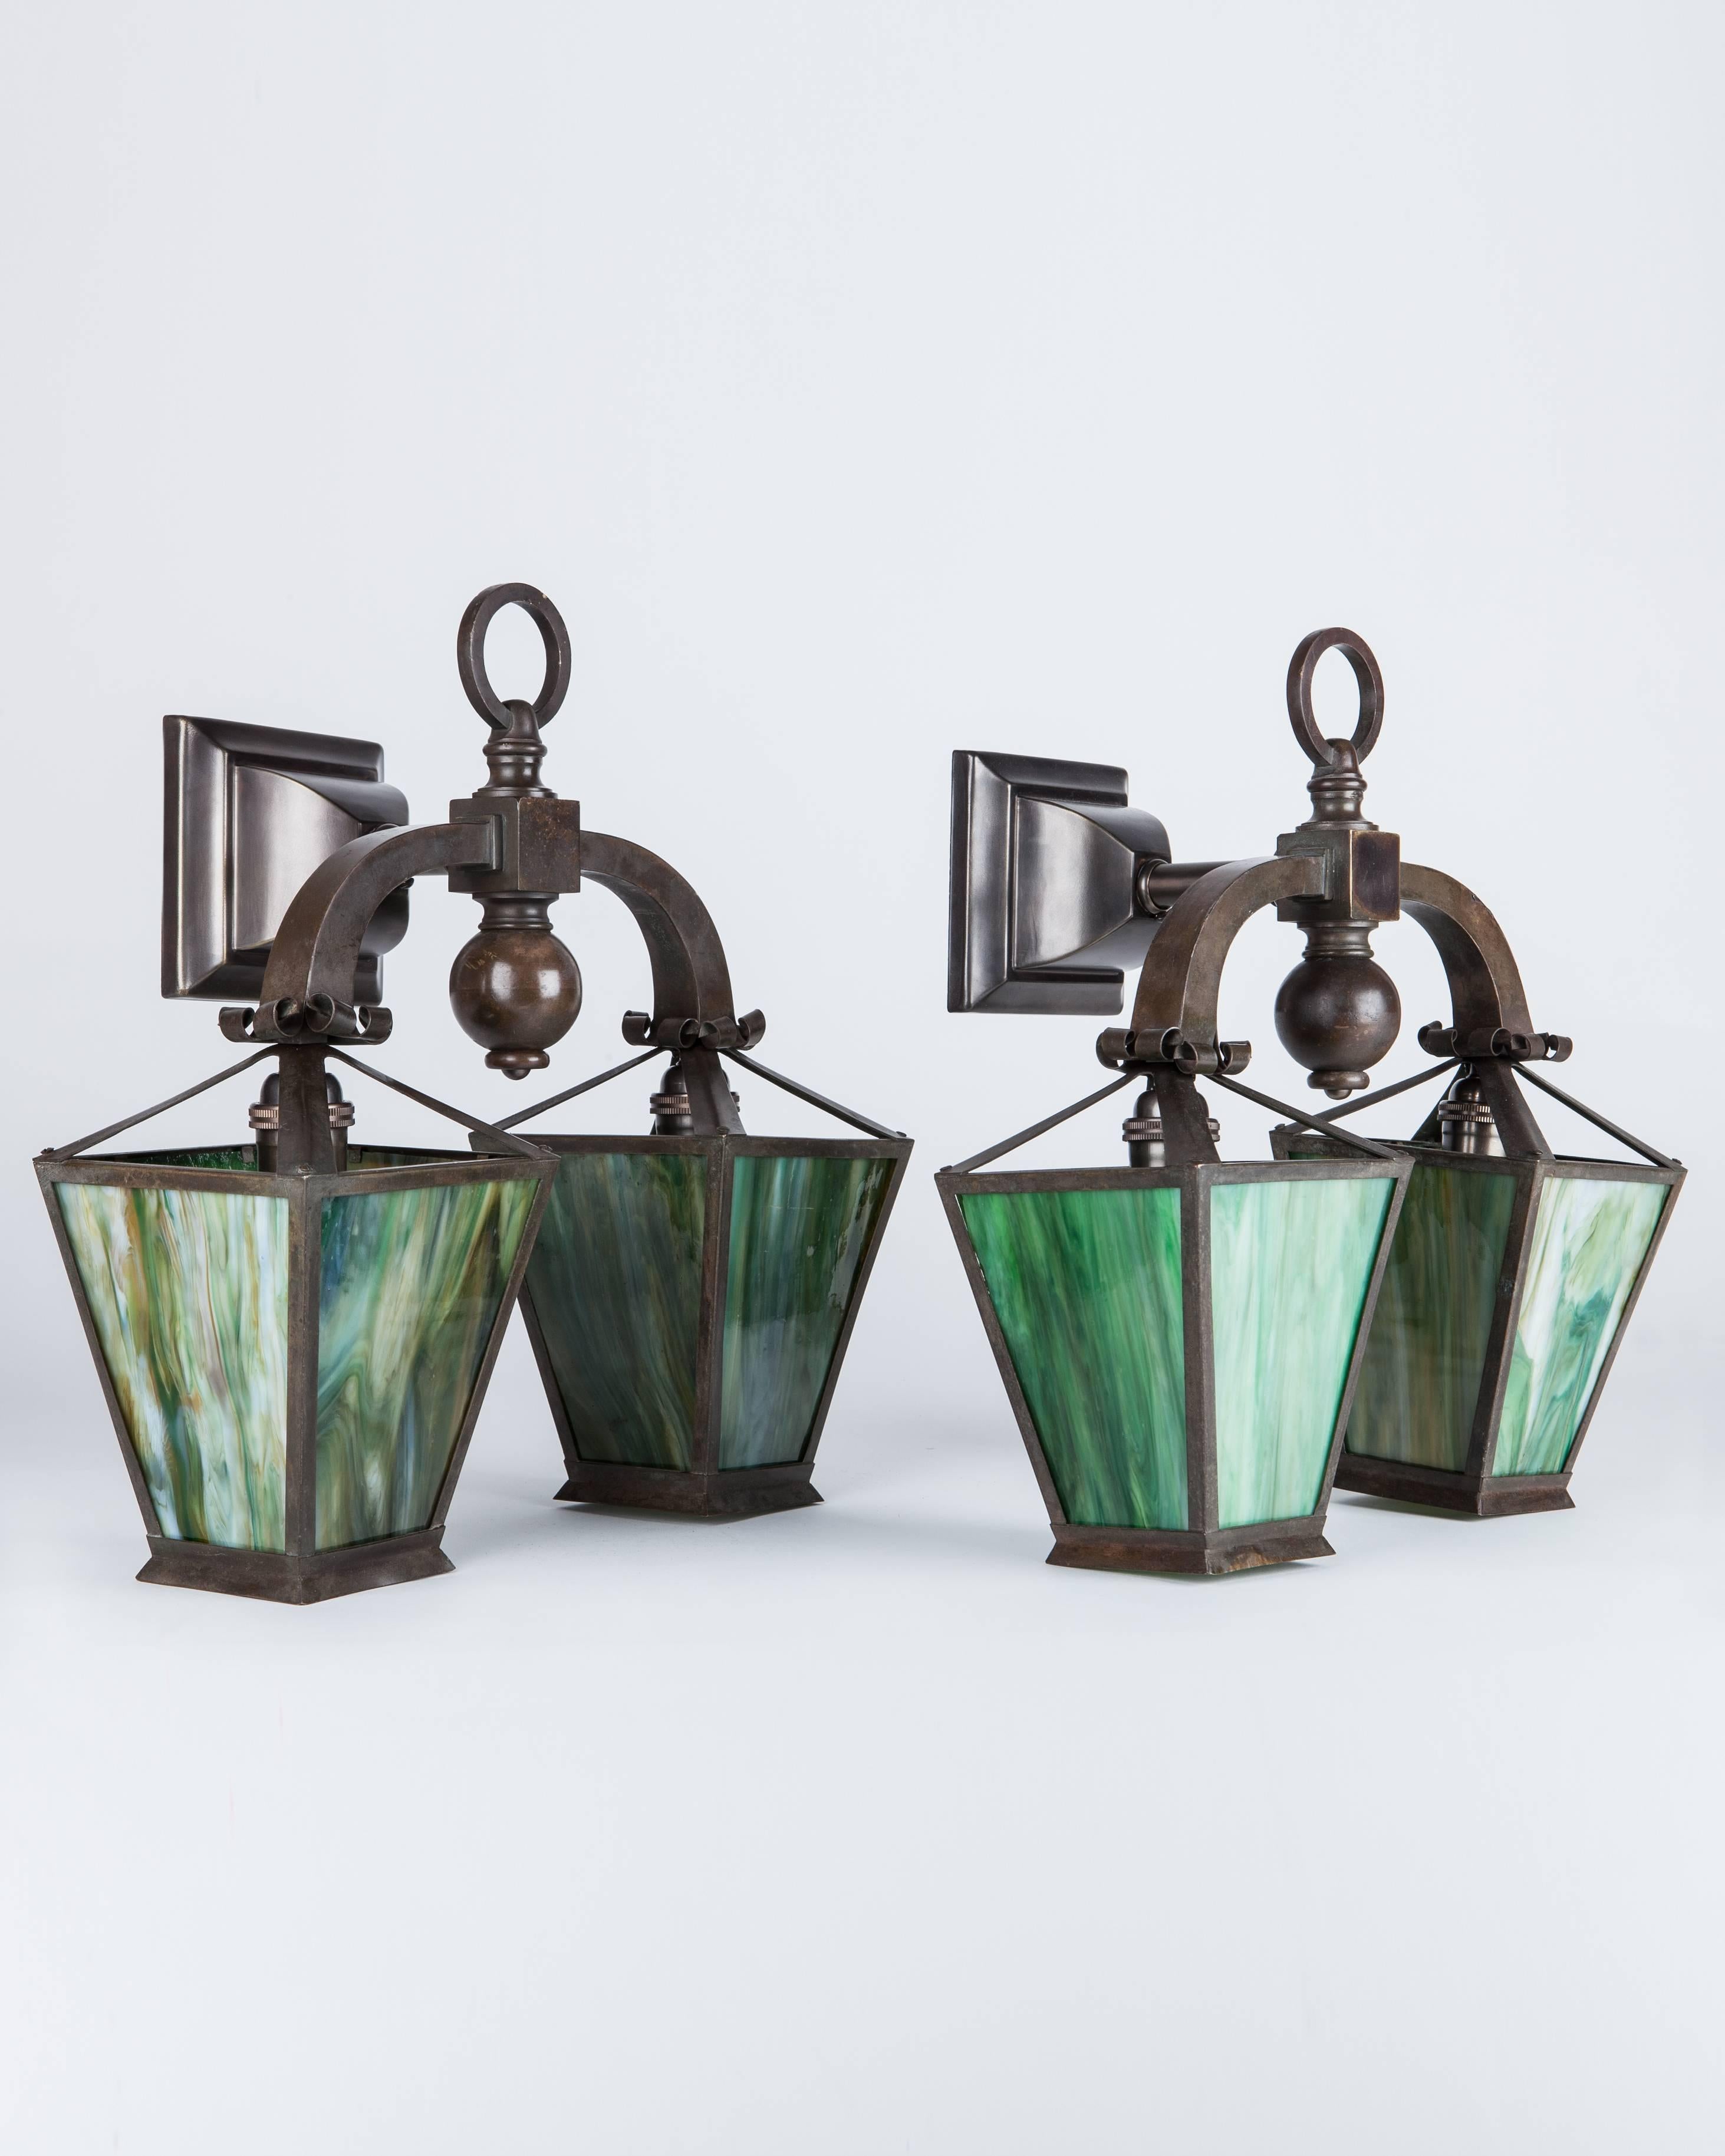 AIS2944
A pair of antique Arts and Crafts period double-light sconces, with tapered four-sided lantern shades in striking green art glass. The metalwork all in age-darkened brass. Originally fitted for both gas and electric. Due to the antique